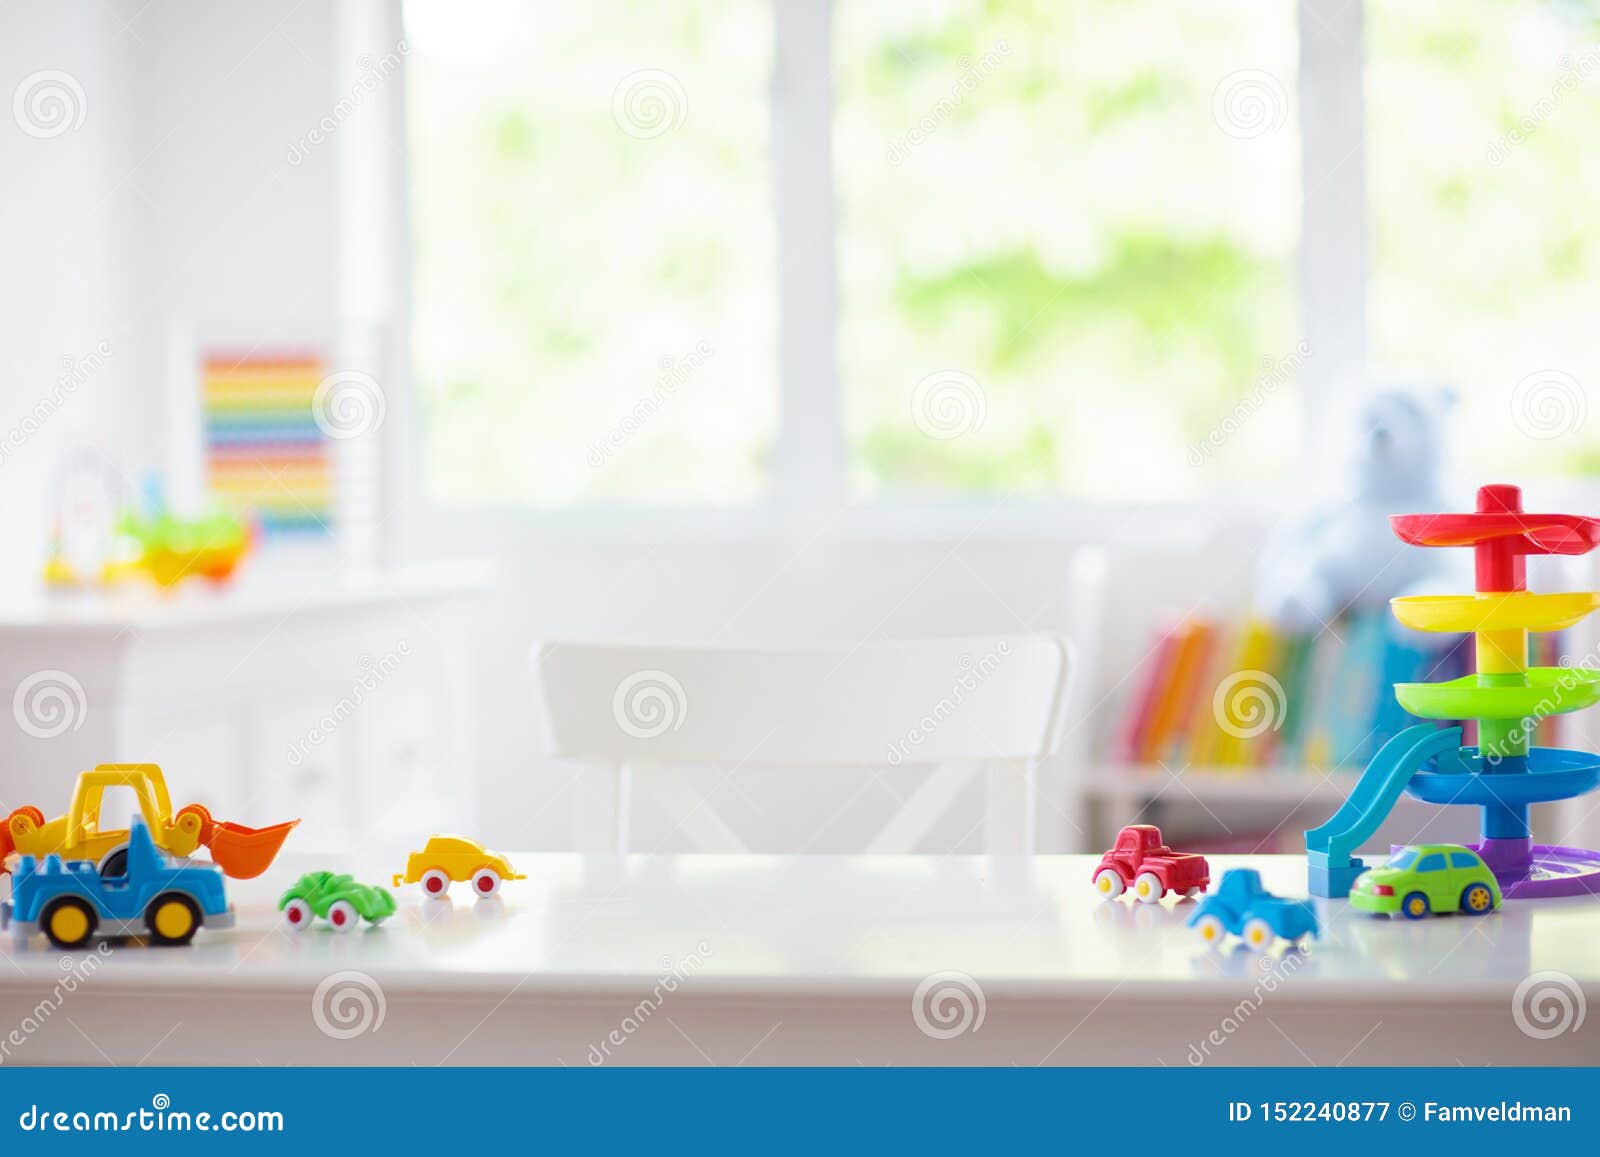 Little Boy Room Toy Cars At Desk Car Toys Stock Image Image Of